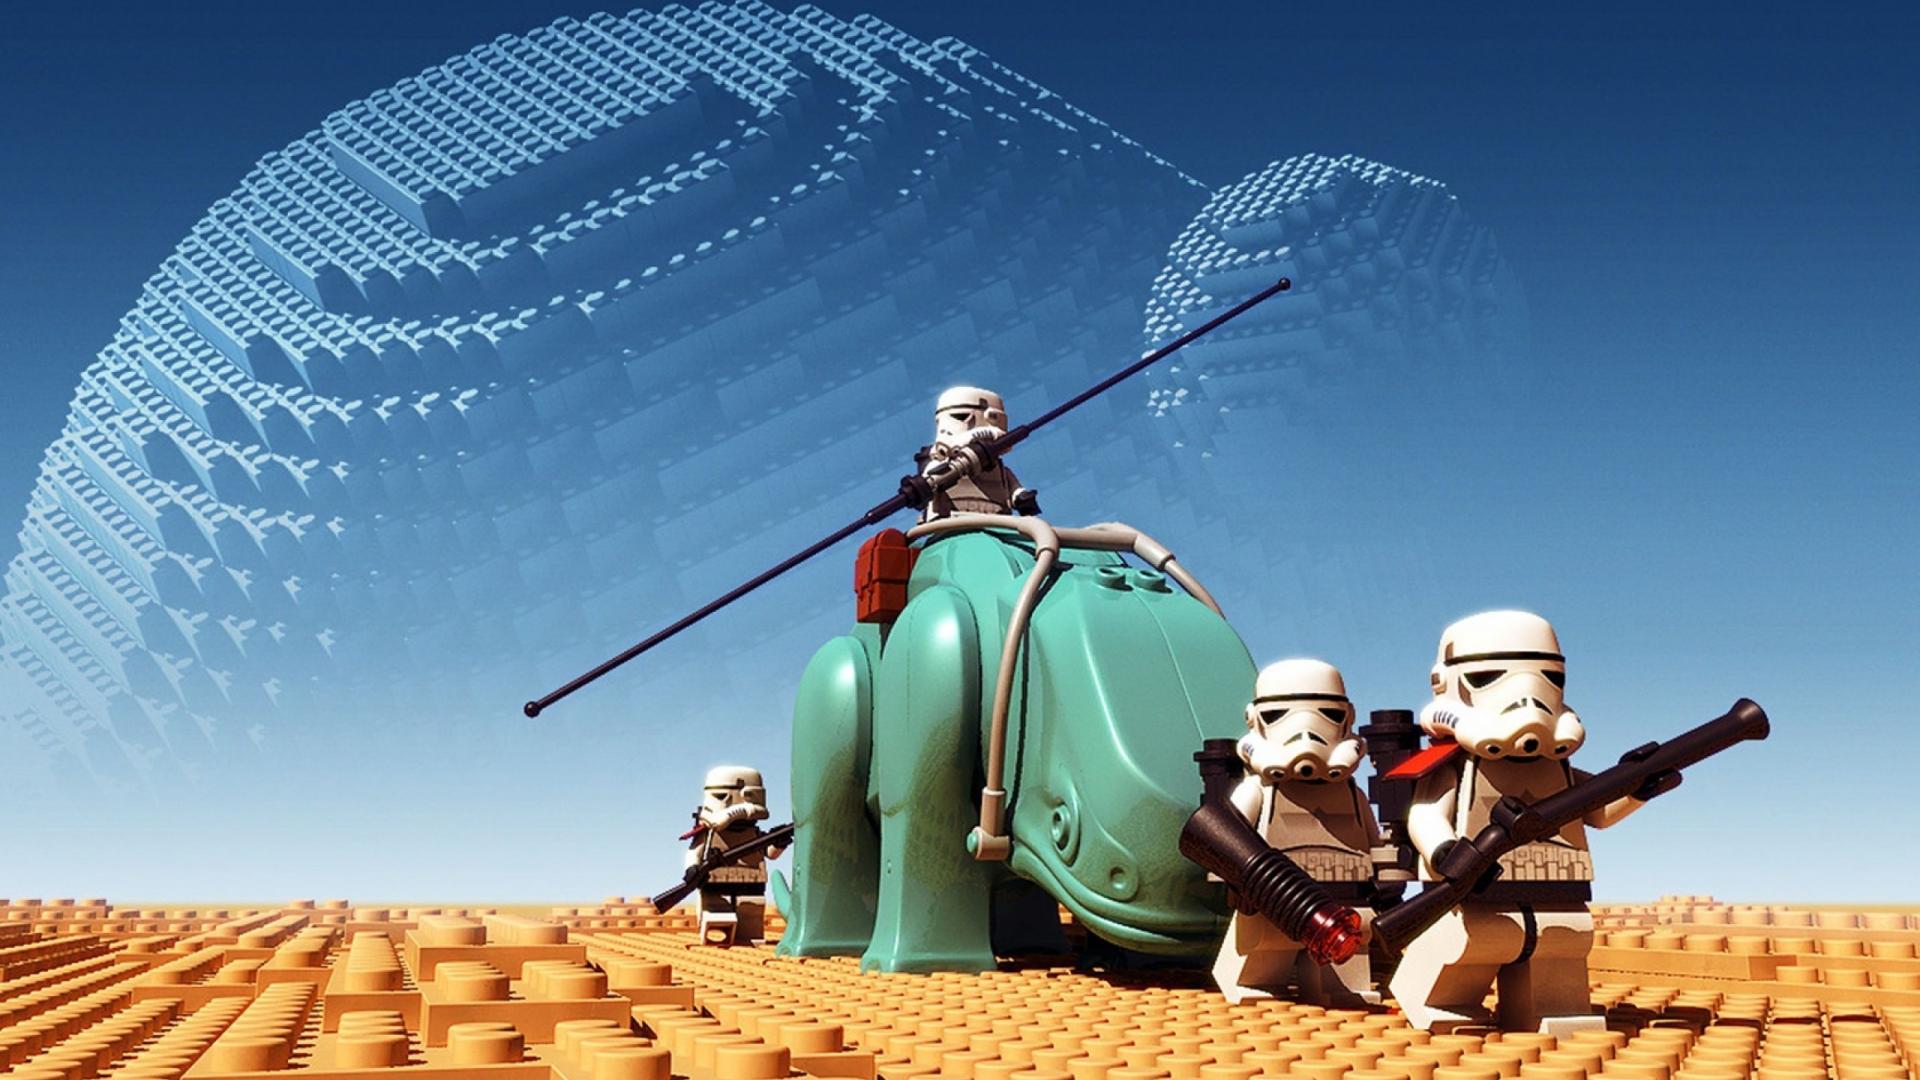 Cool Lego Wallpapers HD 